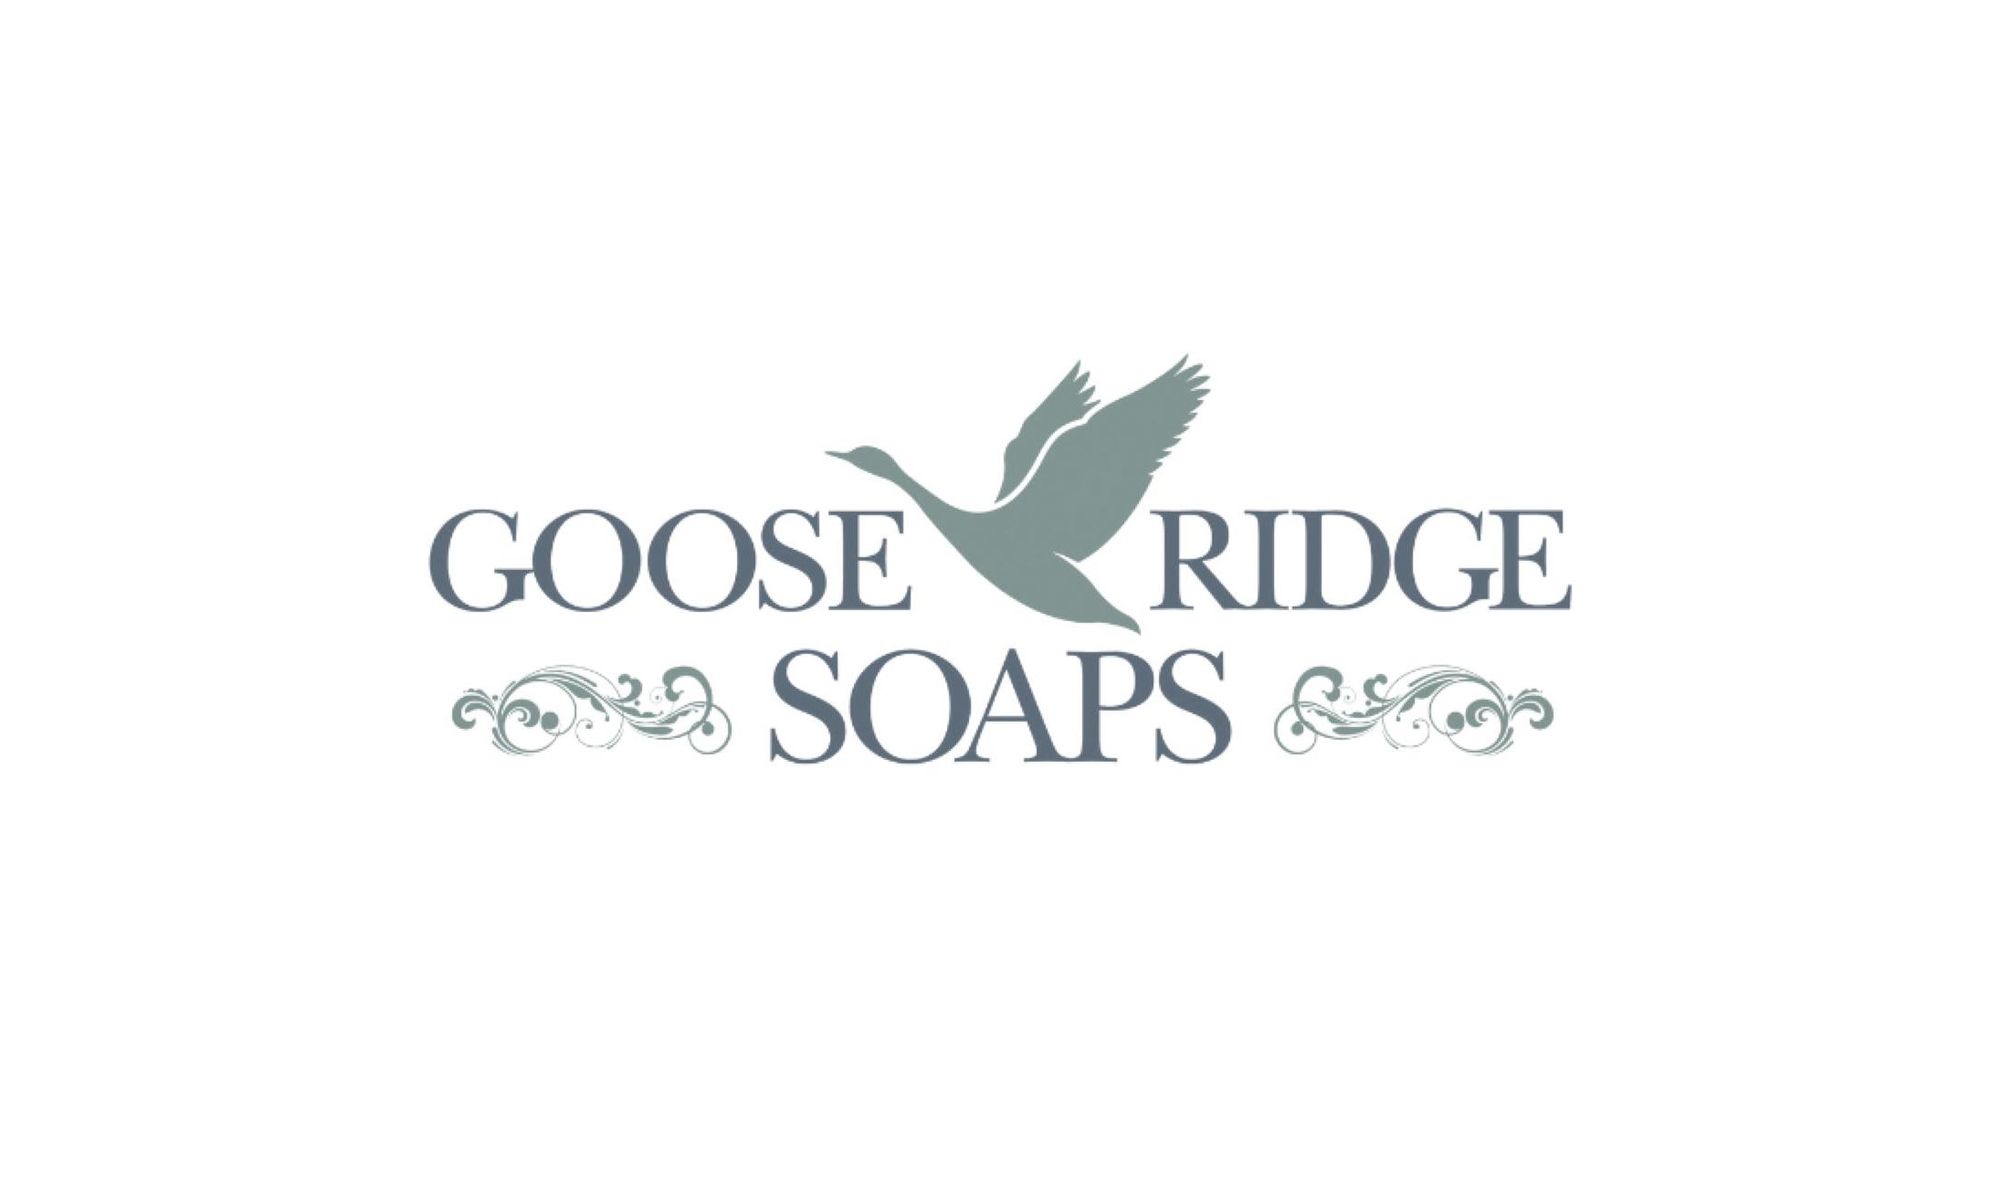 Cold Process Soaps and More - Goose Ridge Soaps